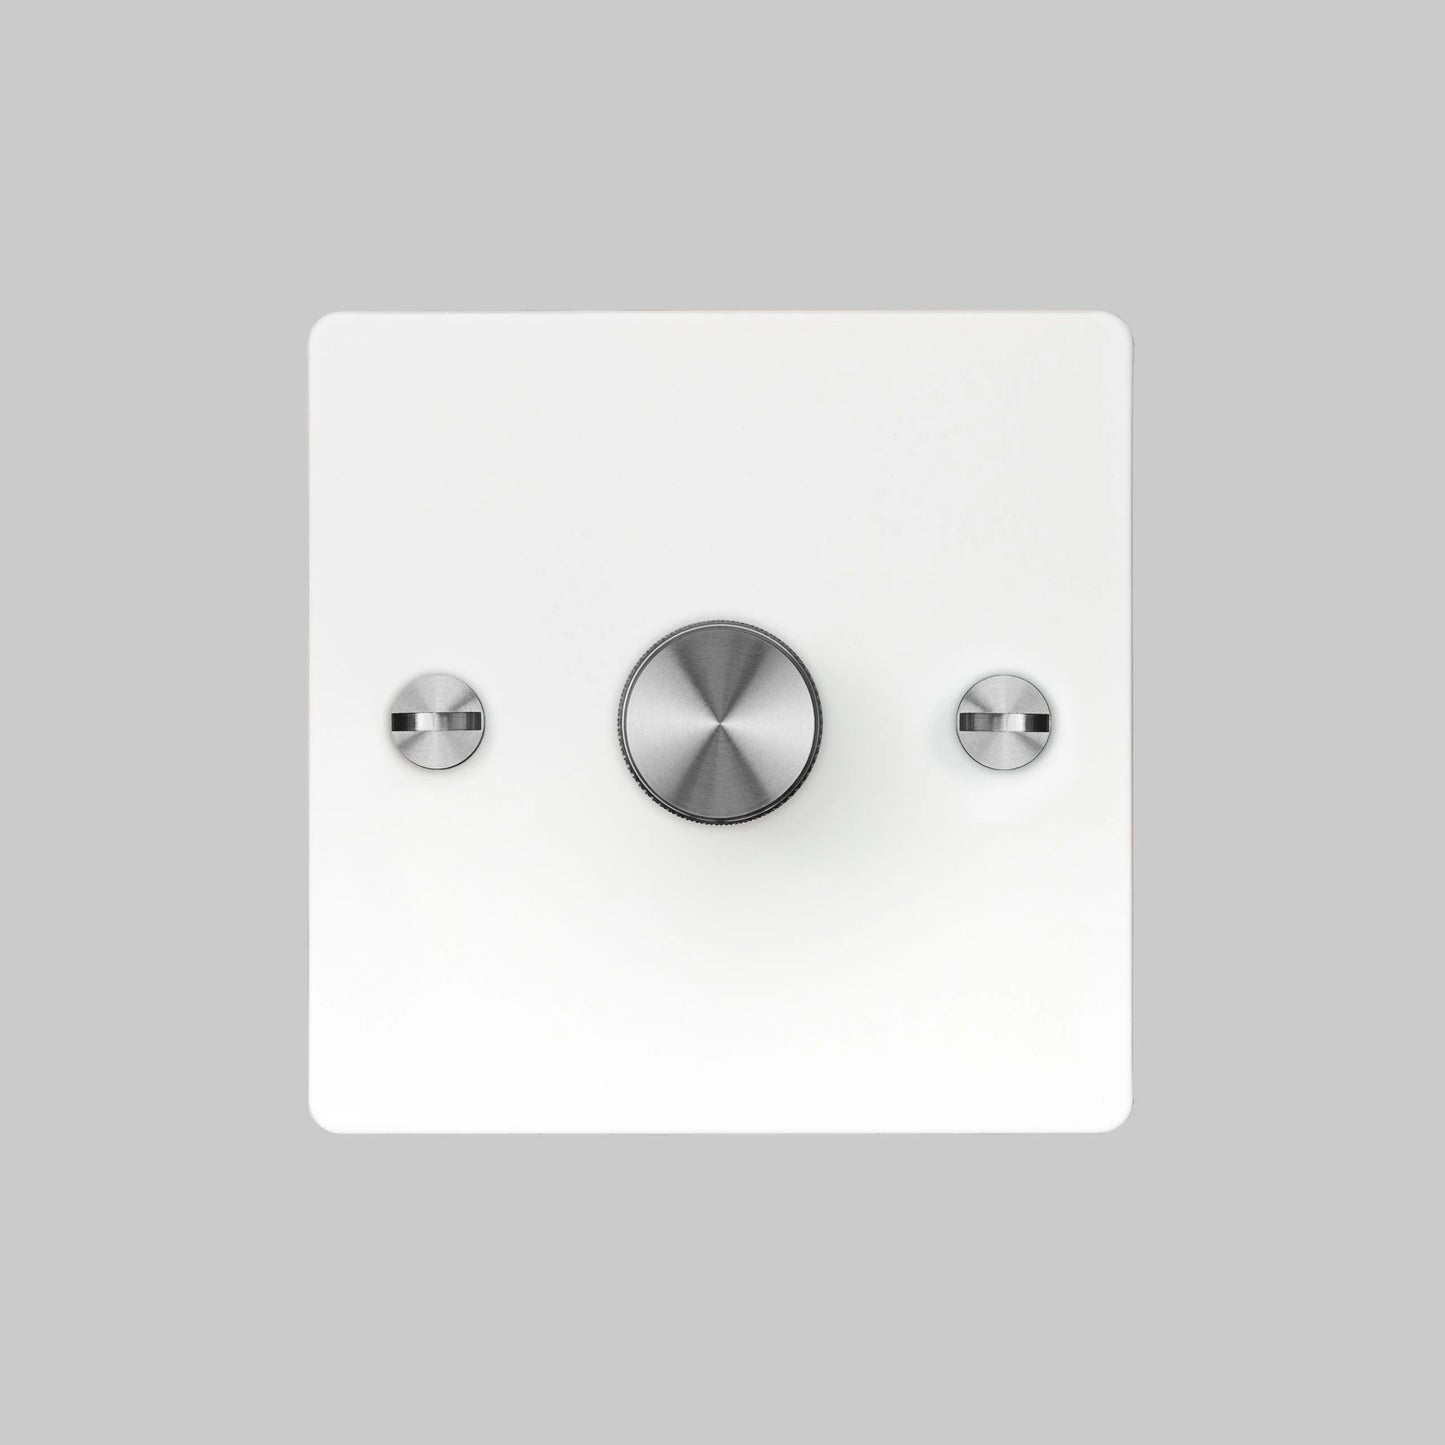 1G Dimmer/ 120W/ White with steel details, front view.